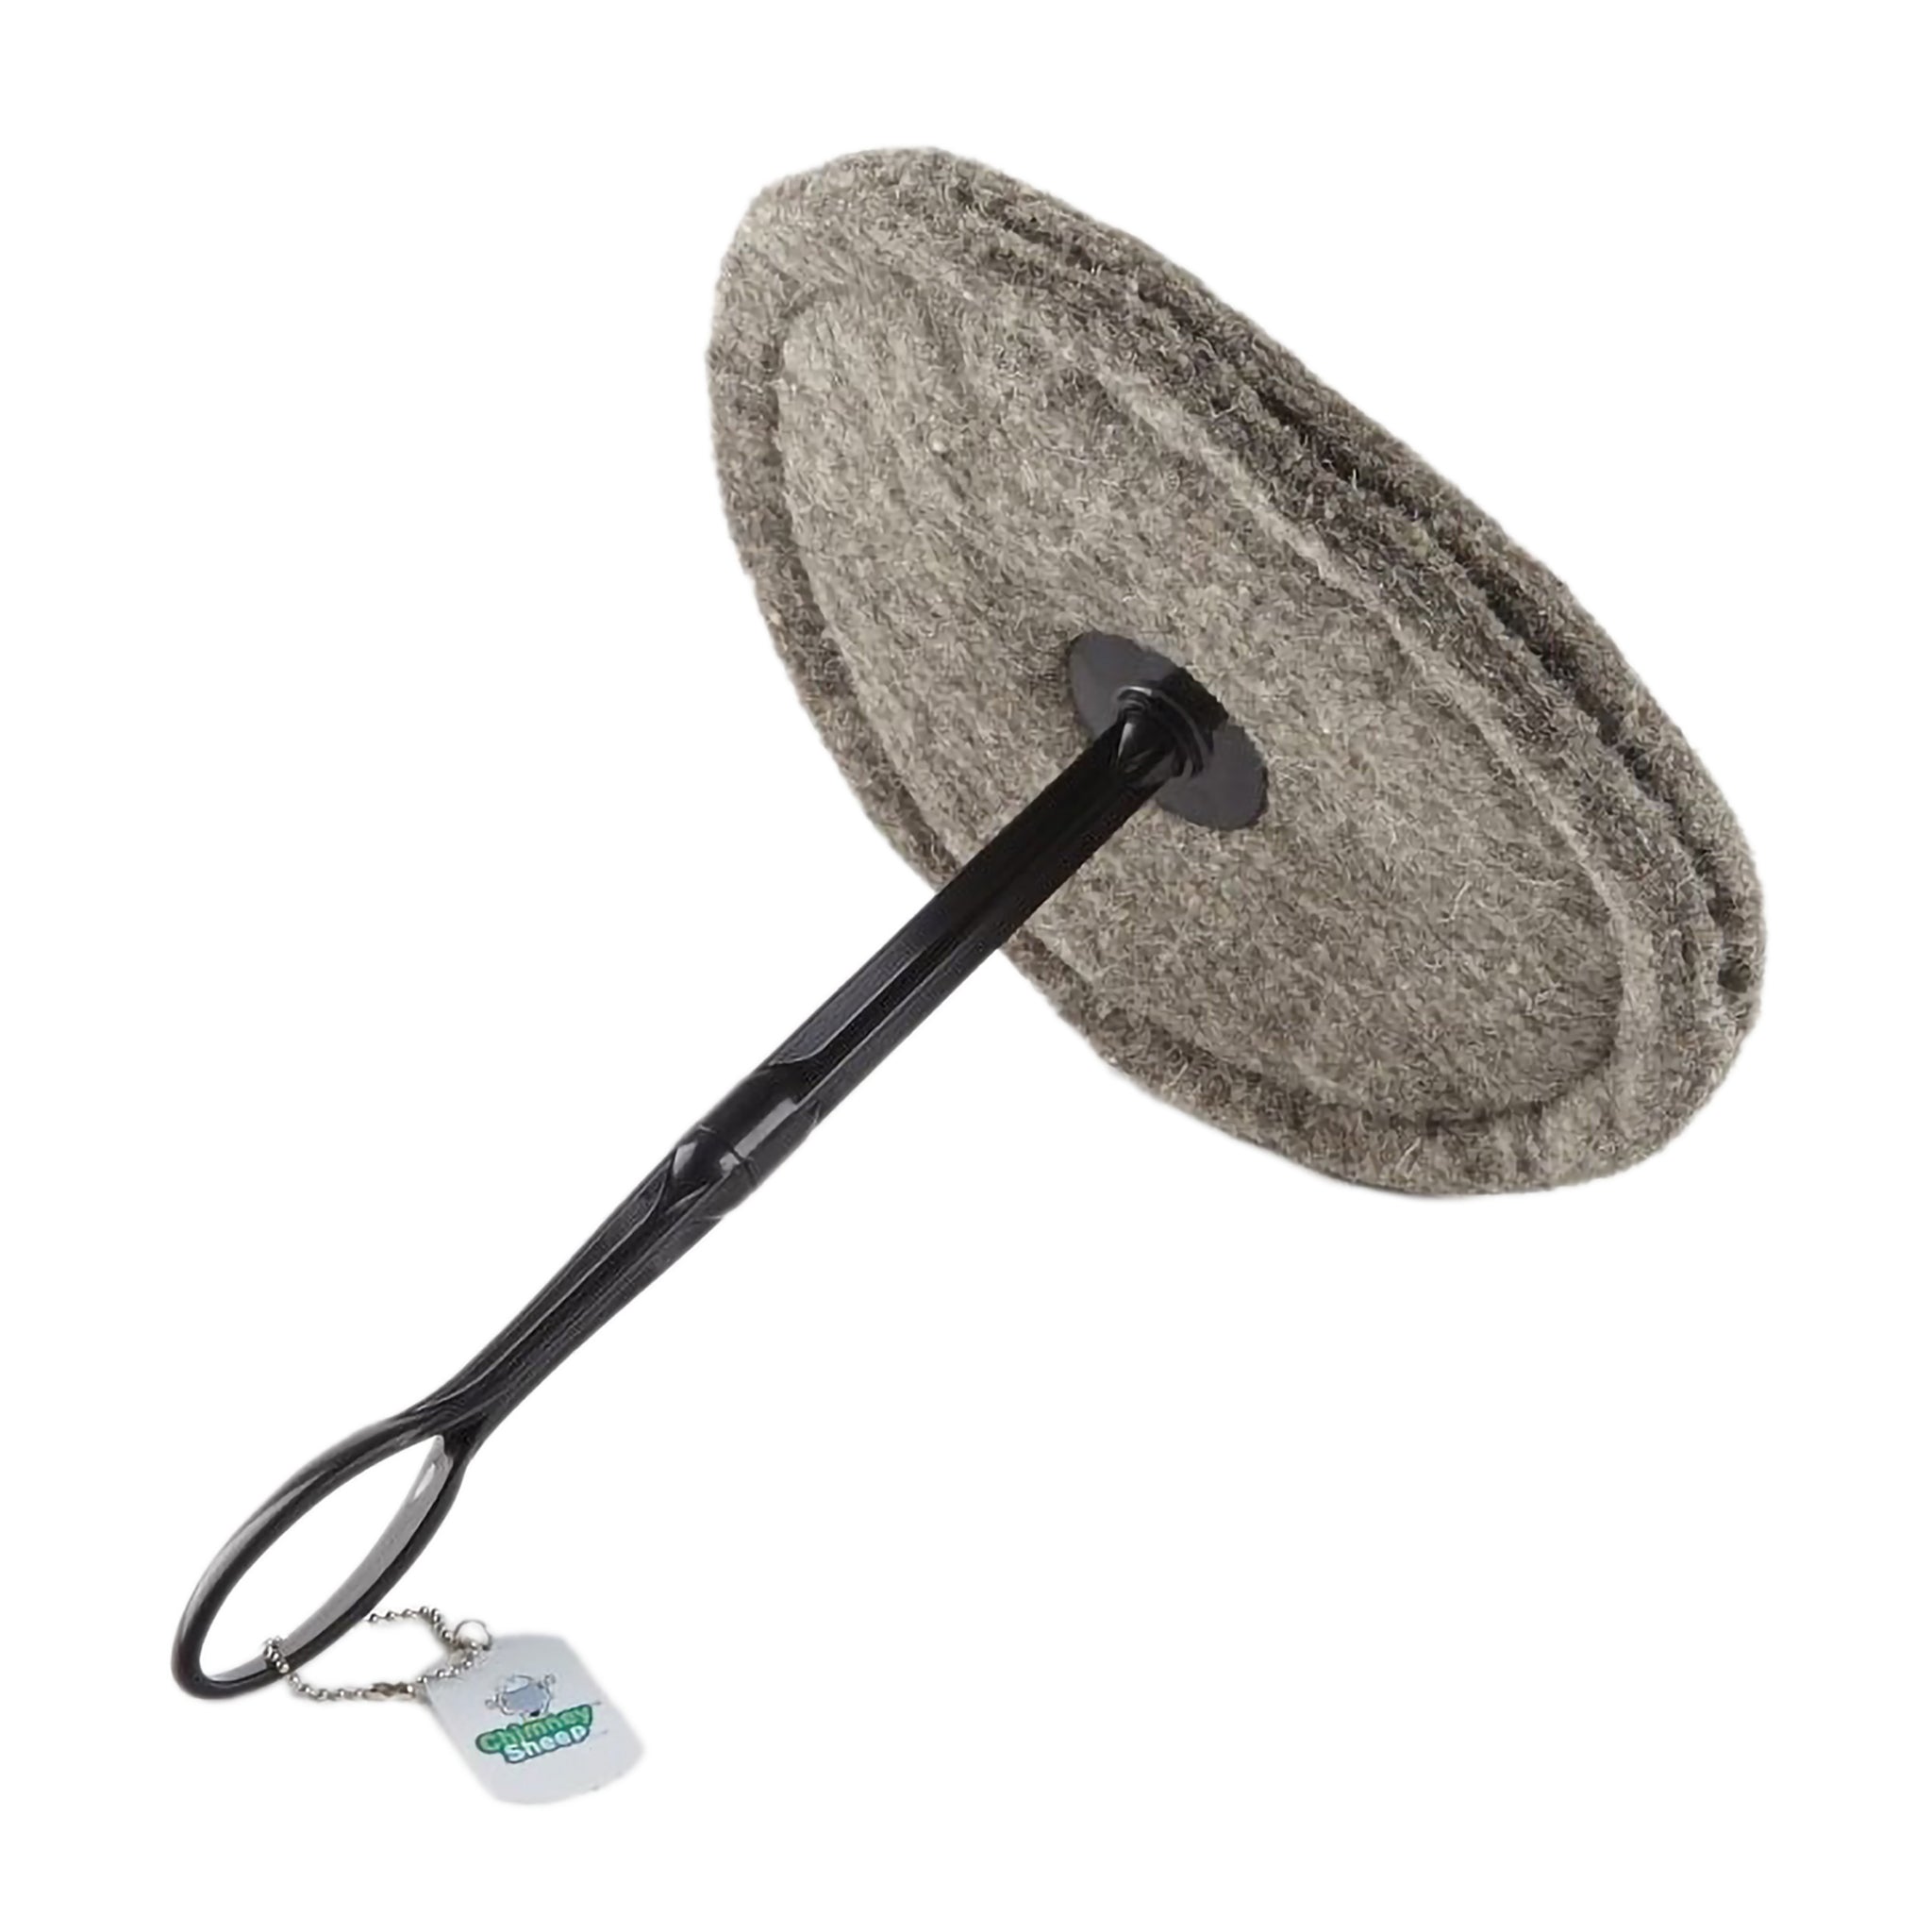 Round wool chimney draught excluder with extension rod and handle attached.